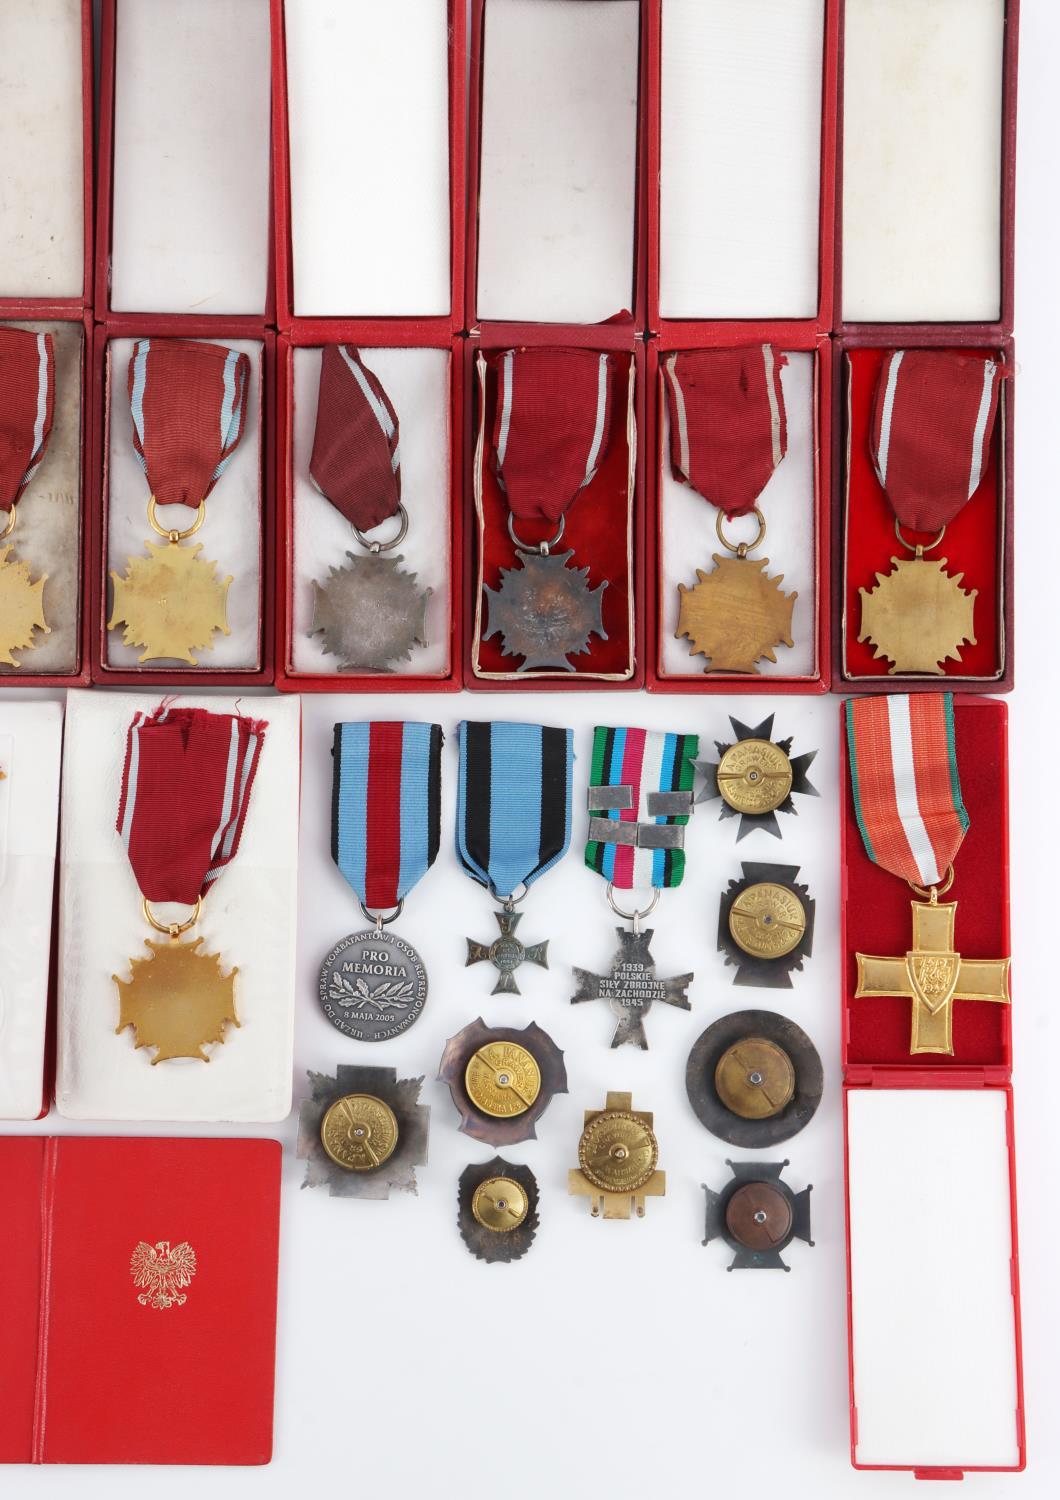 32 WWI TO POST WAR POLISH MILITARY REGIMENT MEDALS